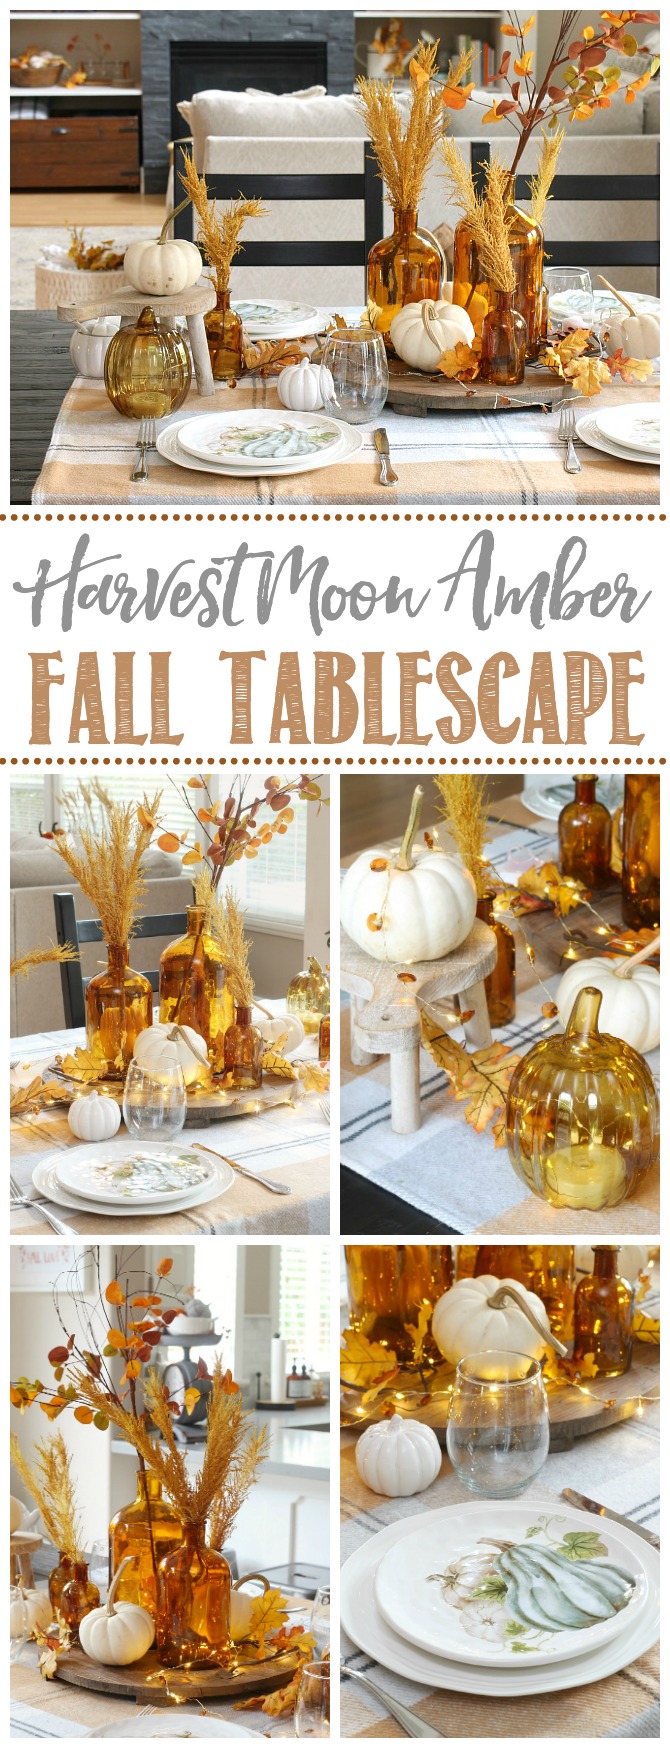 Harvest moon fall tablescape ideas for fall or Thanksgiving. Beautiful amber glass and muted fall colors in a farmhouse style kitchen.